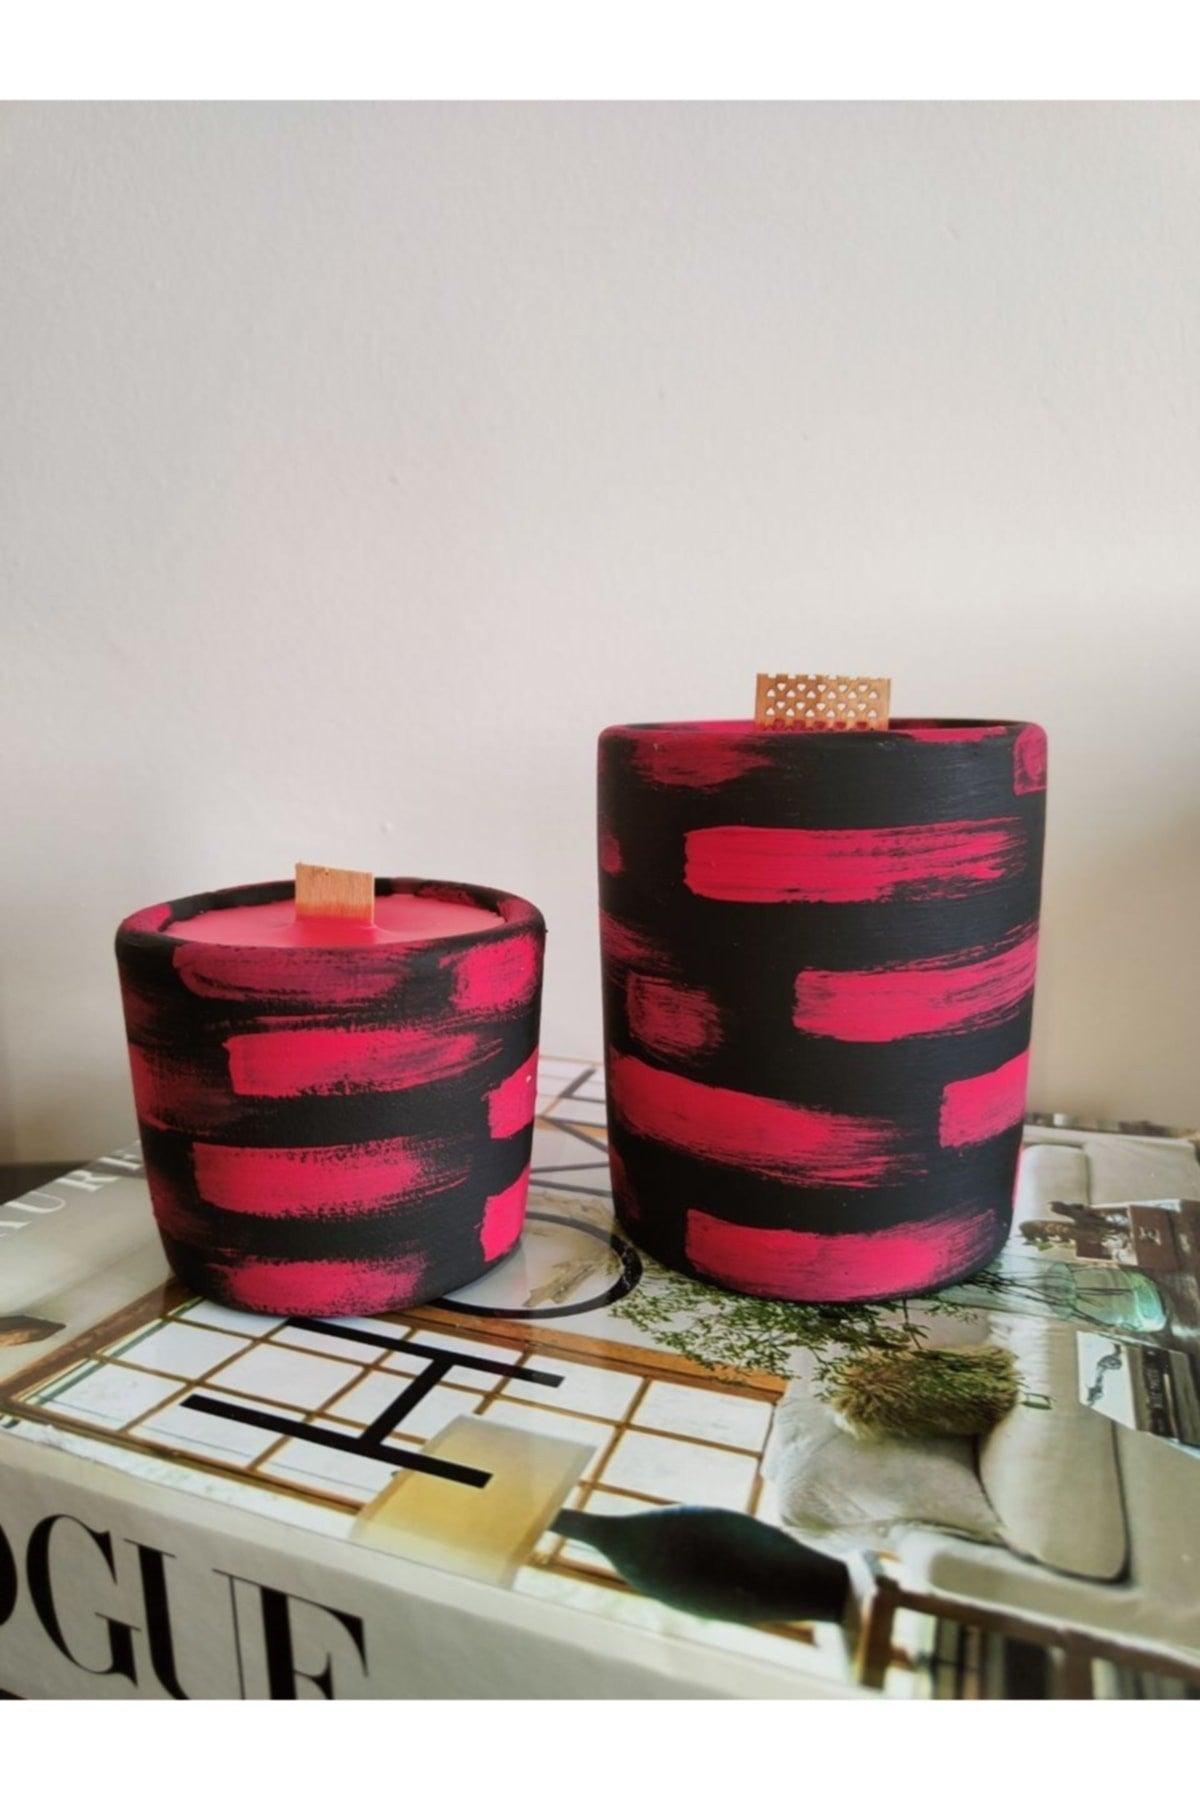 Decorative 100% Soy Wax Japanese Cherry Scented Bamboo Wick Aromatherapy Candle Set of 2 - Swordslife